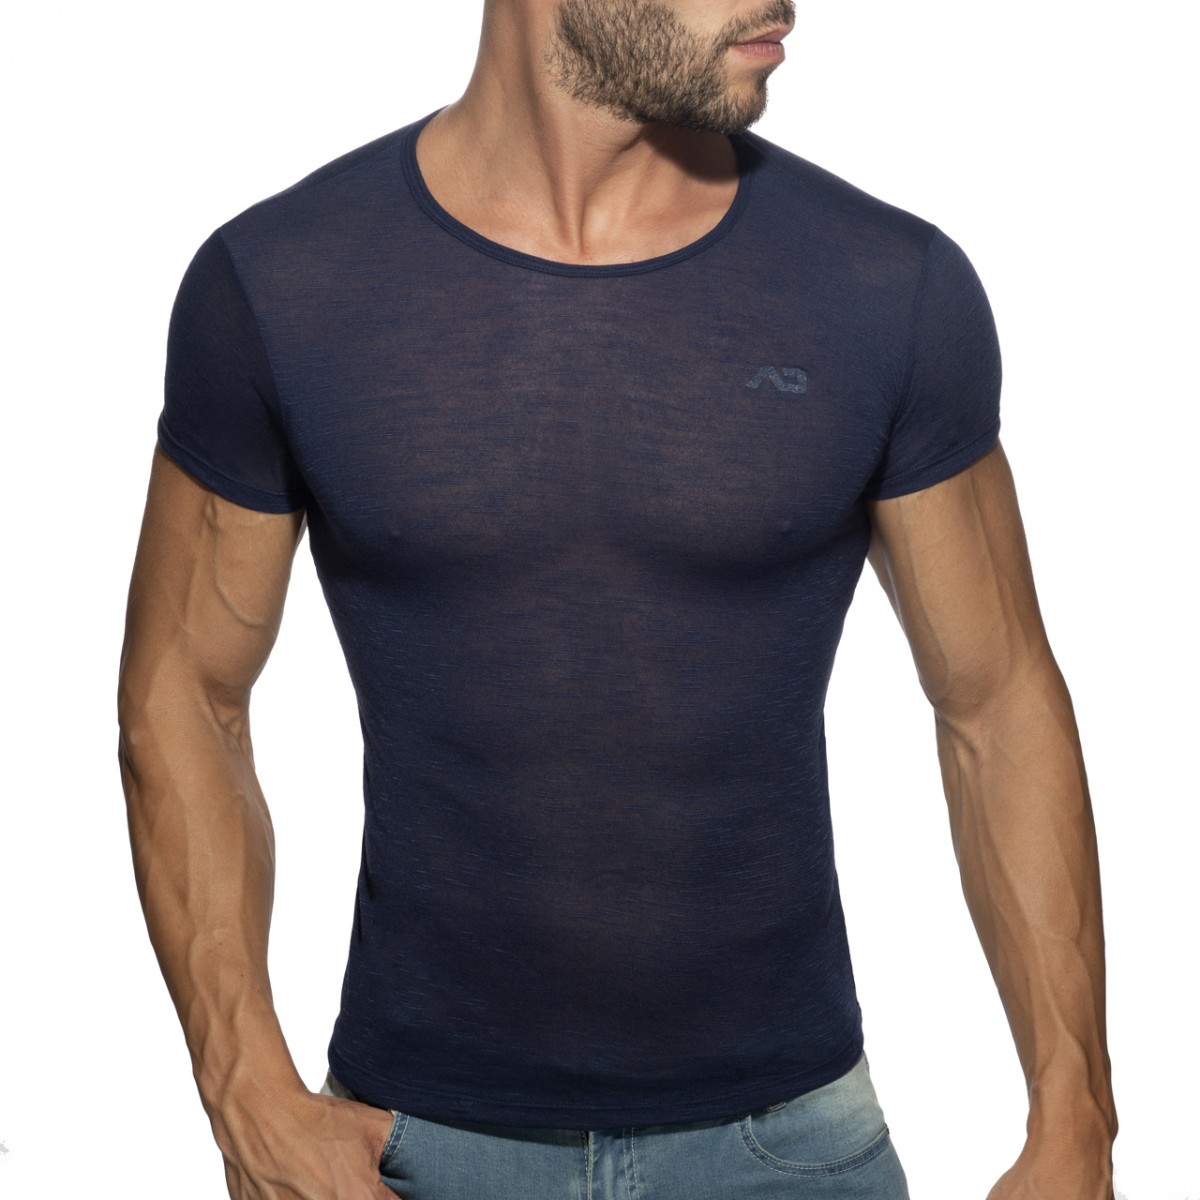 Addicted Thin Flame T-Shirt navy